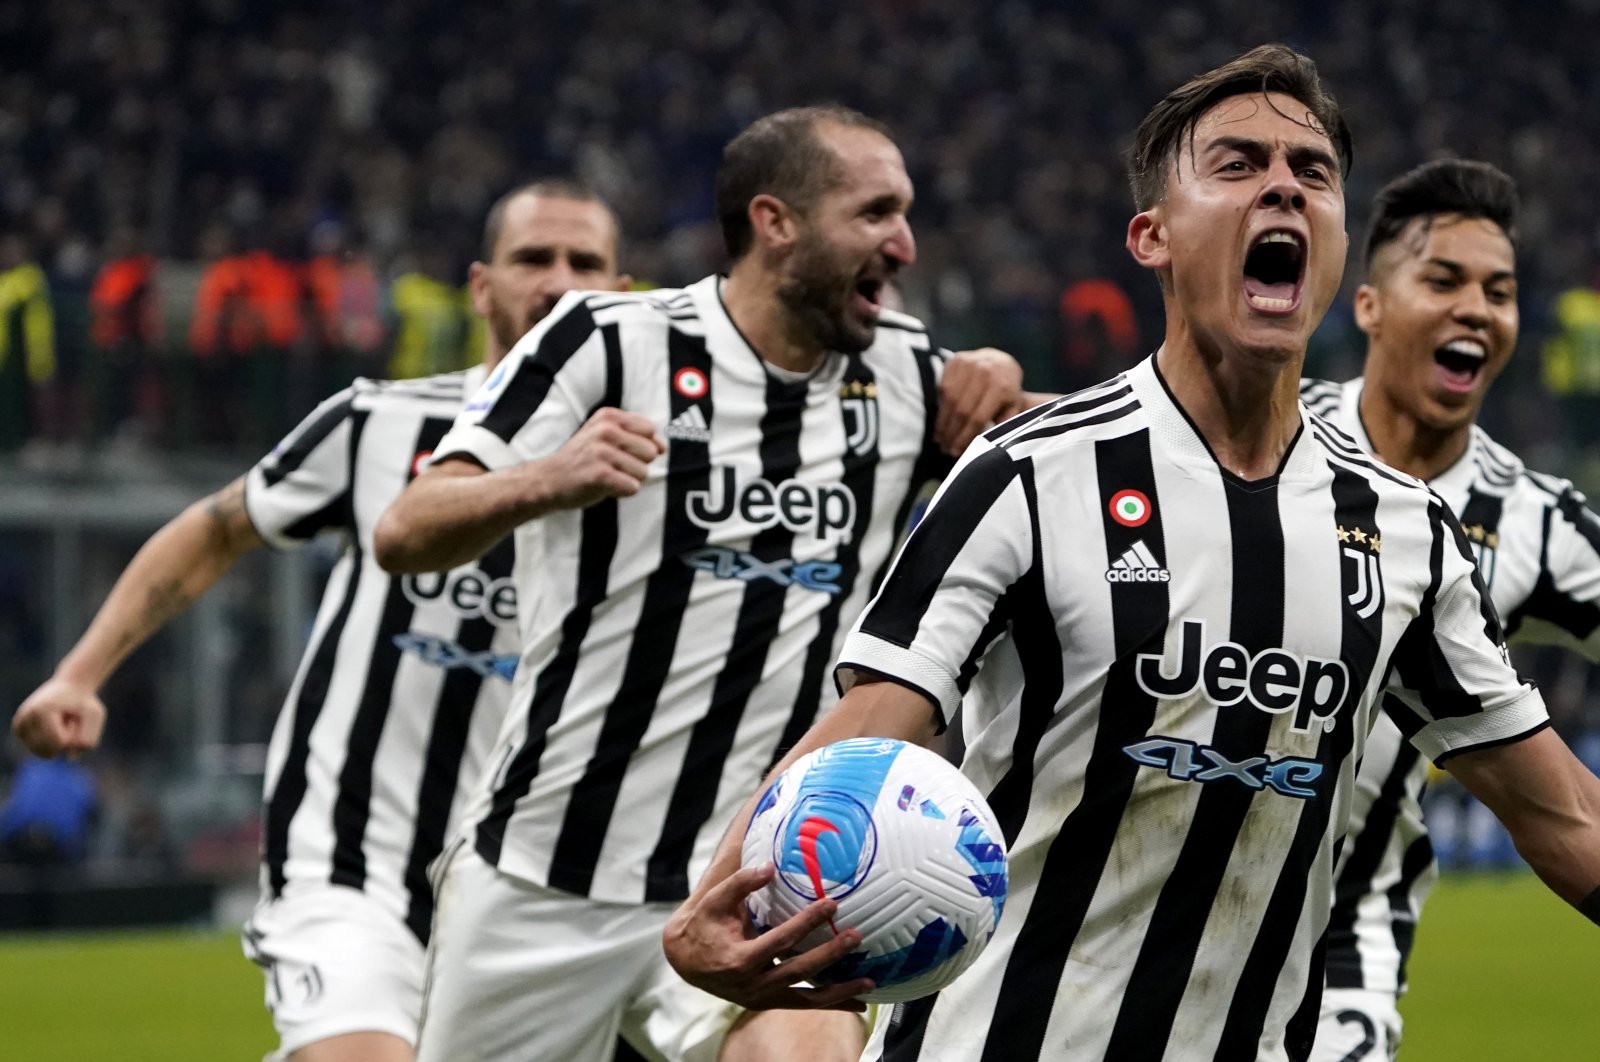 Juventus' Paulo Dybala (2nd R) and teammates celebrate a goal against Inter Milan in a Serie A match, Milan, Italy, Oct. 24, 2021. (AA Photo)